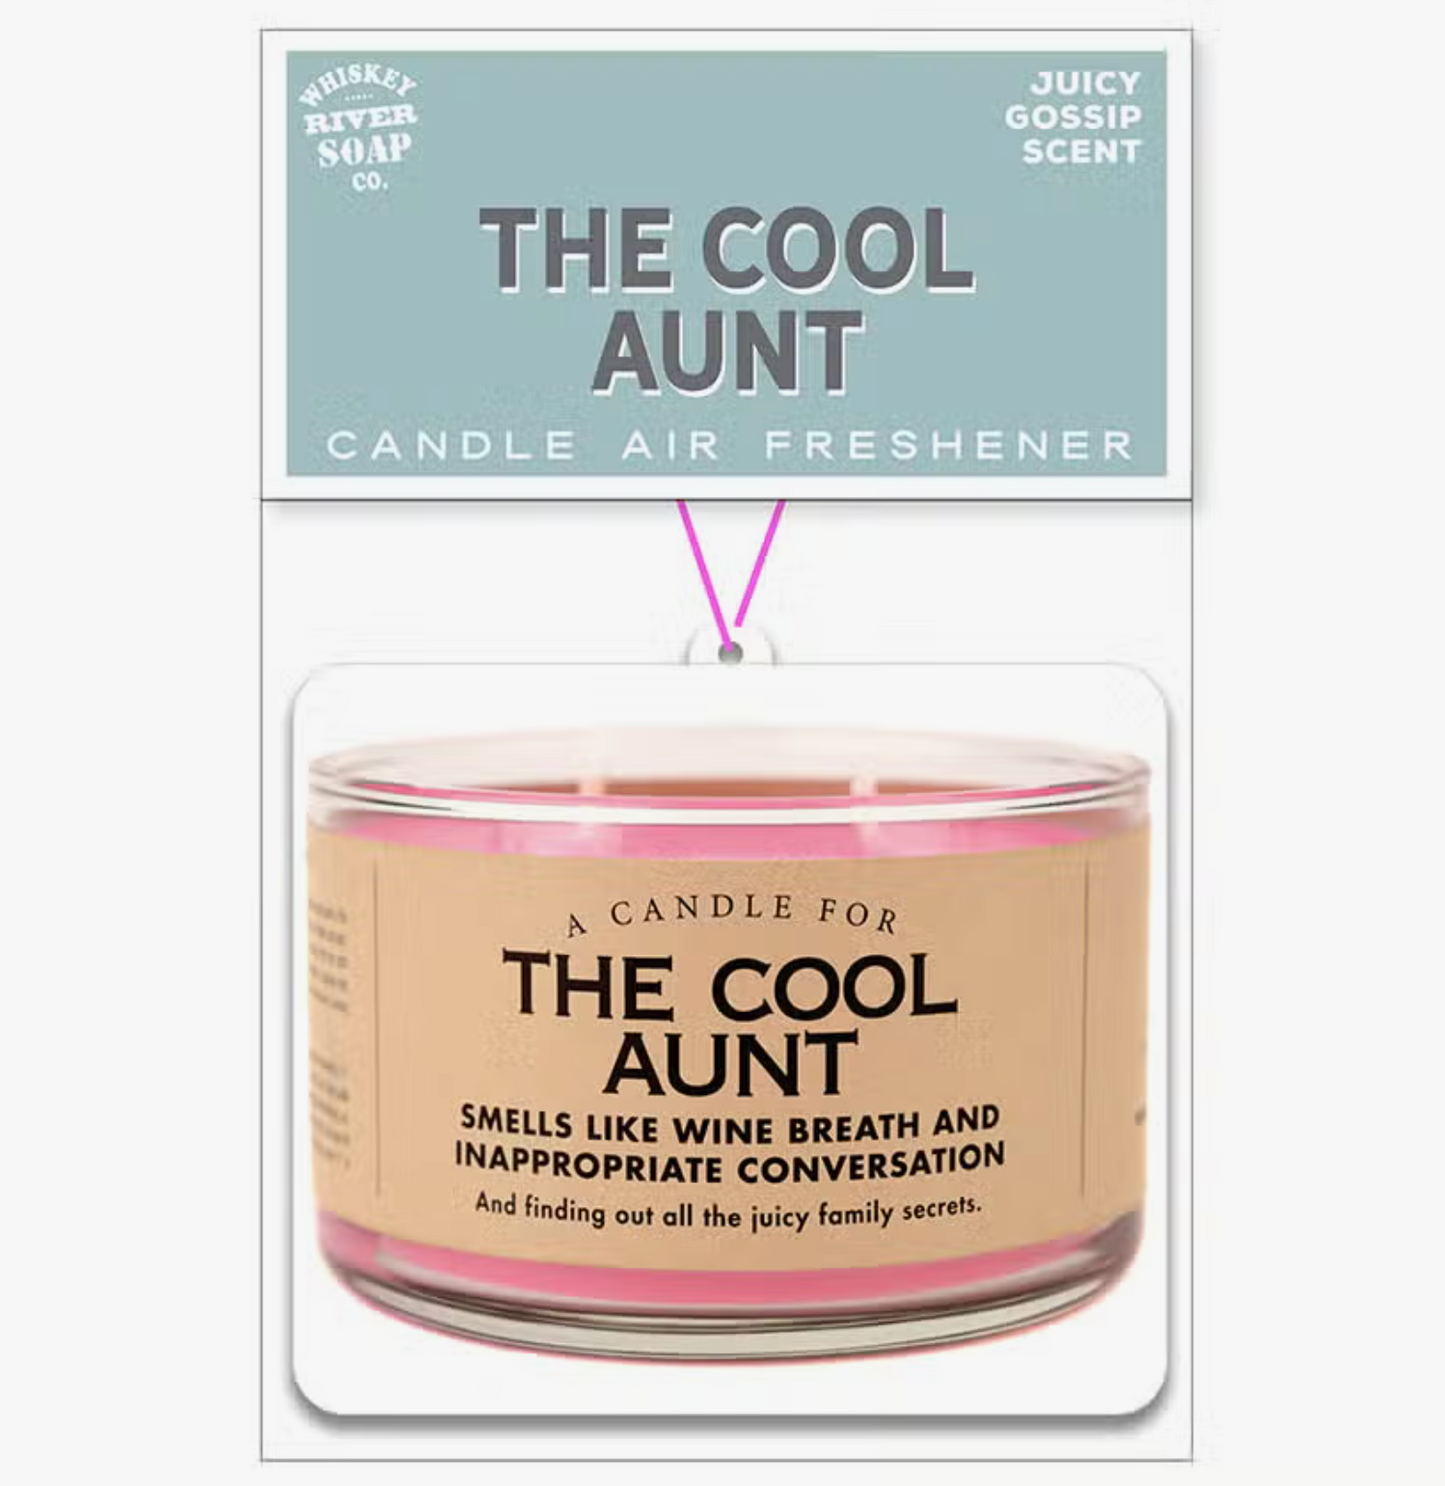 The Cool Aunt Air Freshener